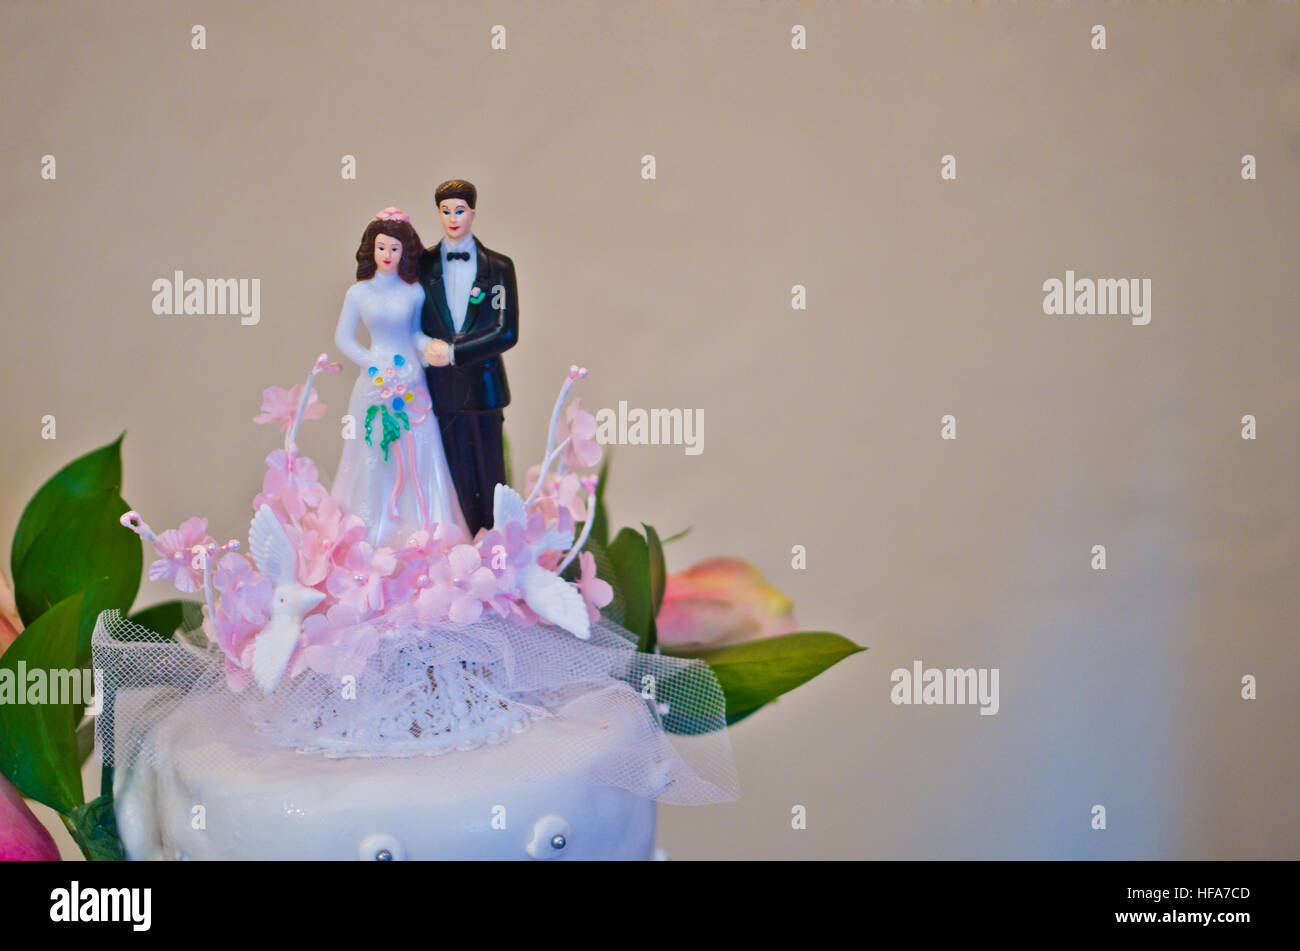 figurines of the bride and groom wedding cake wish all happiness to the newlyweds Stock Photo